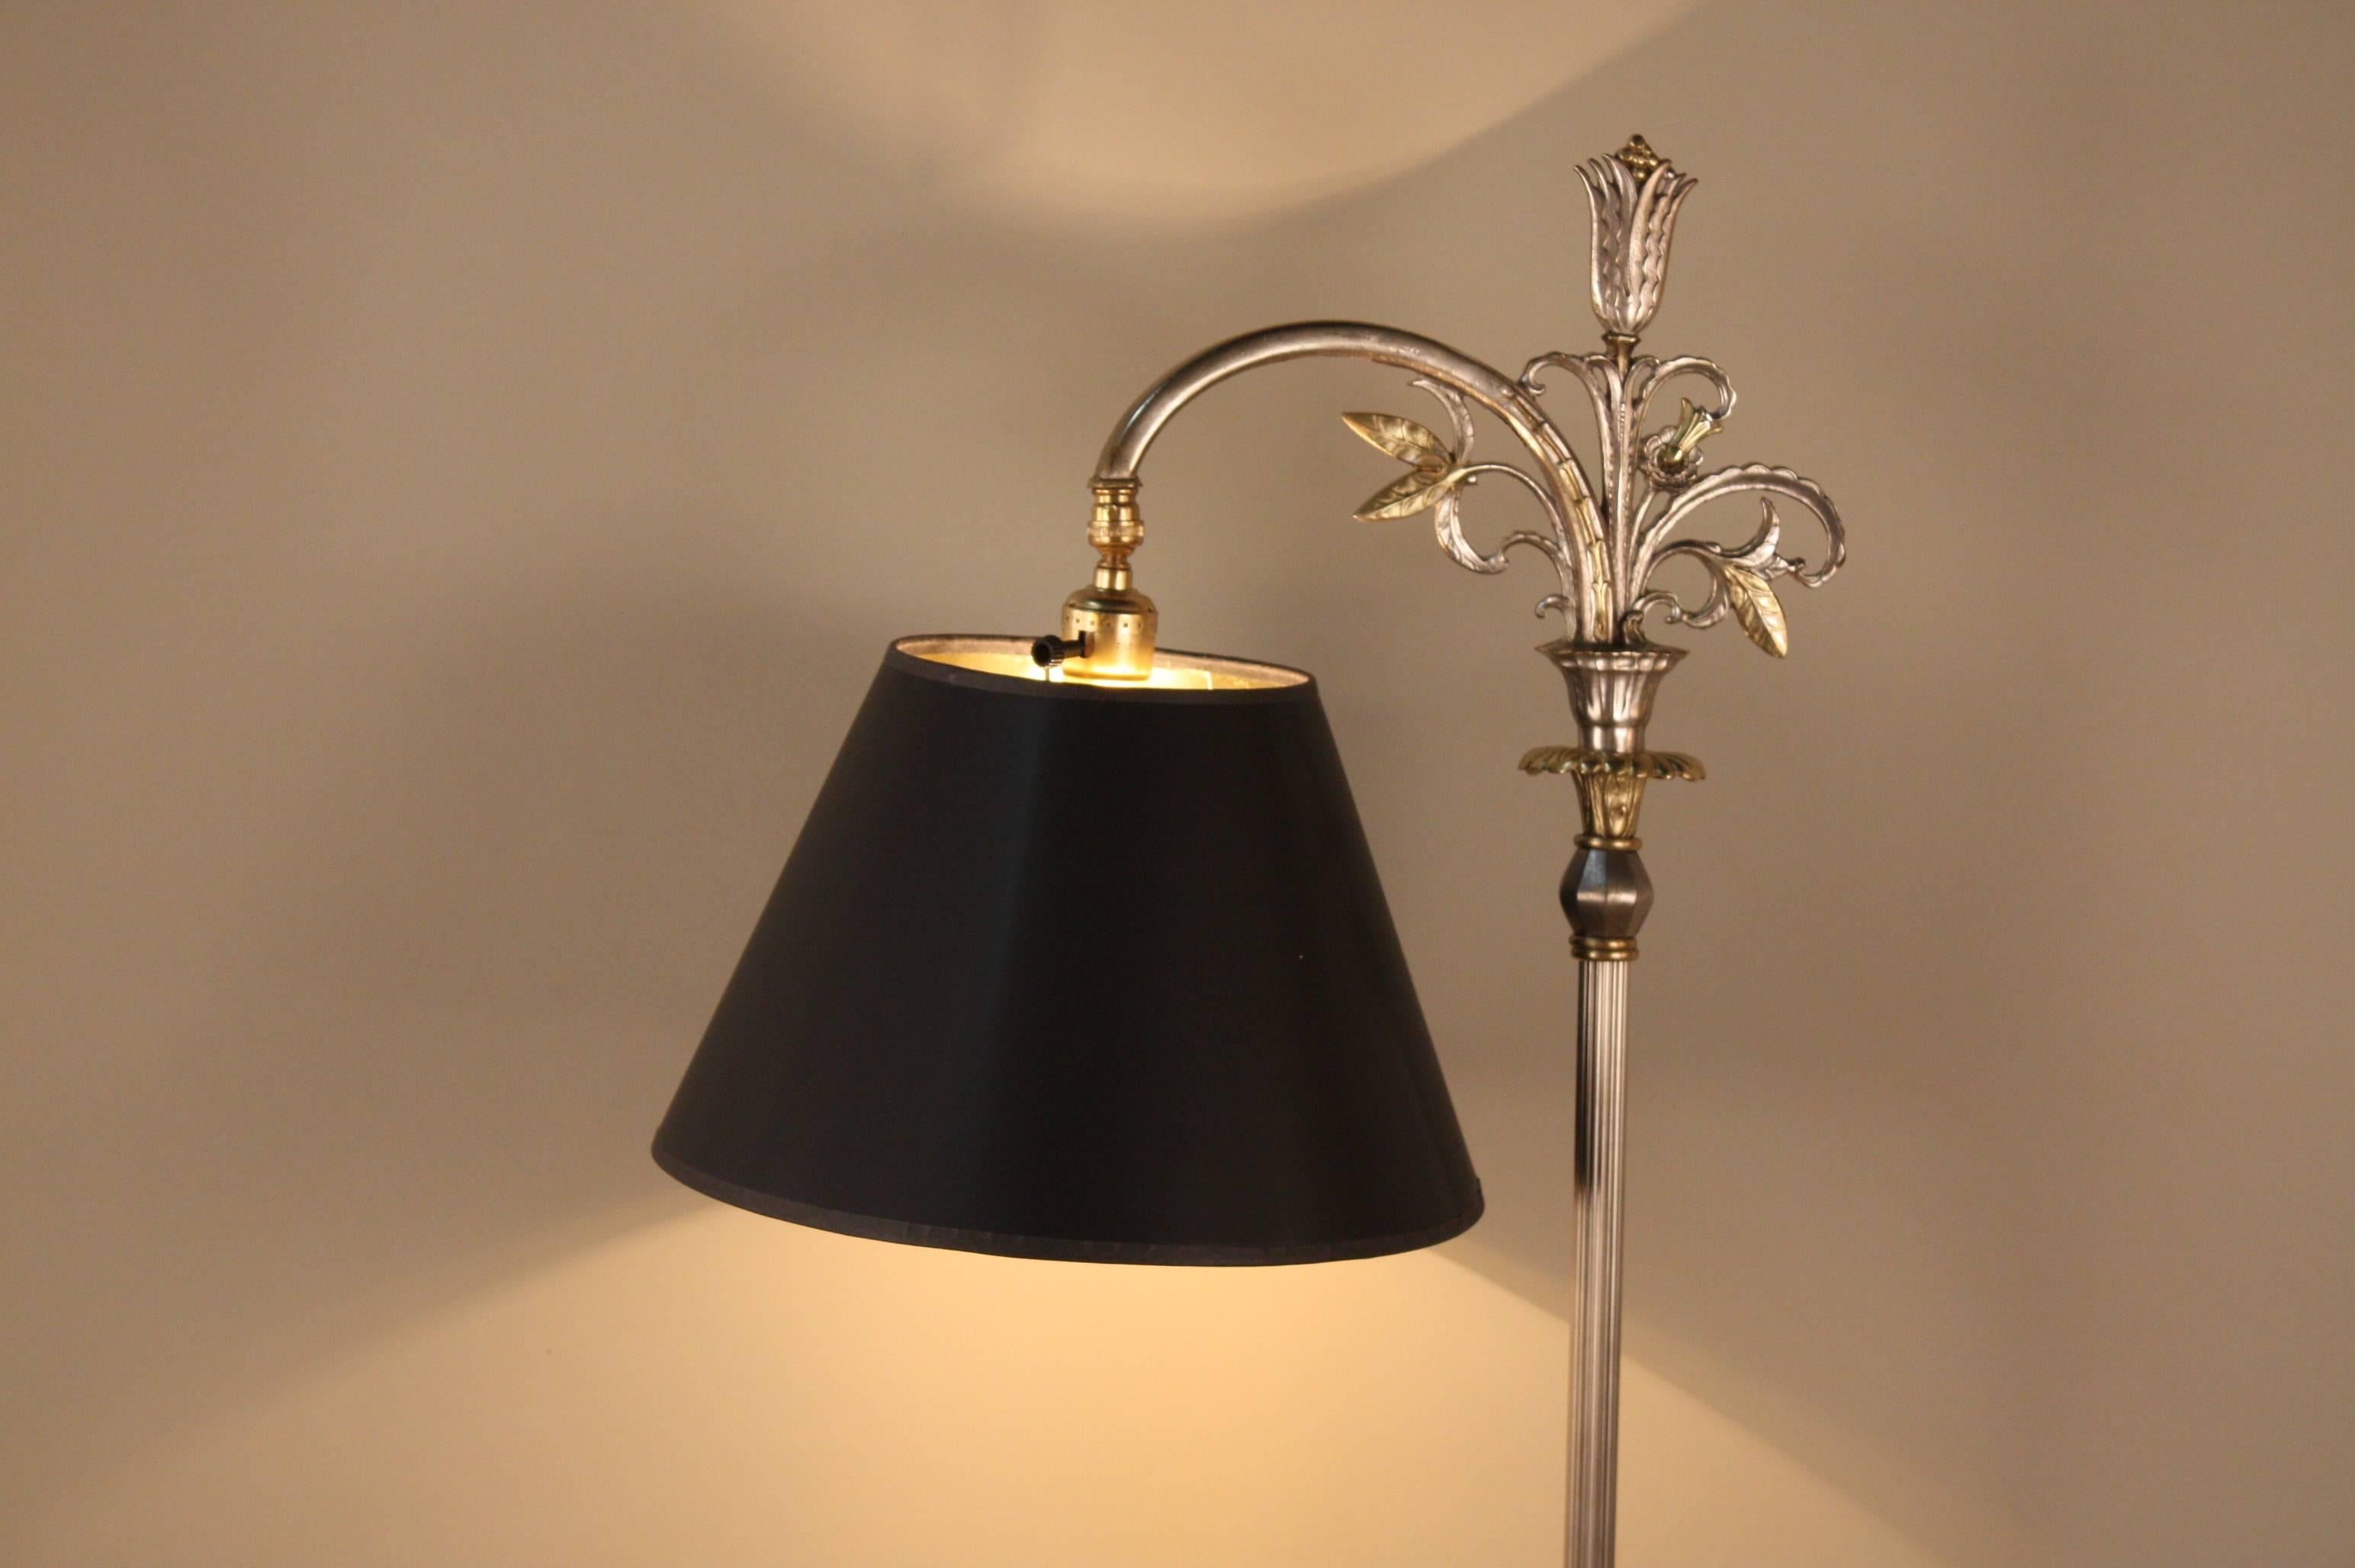 An exquisite American Art Deco floor lamp wit silver and brass finish.
Unusual shape base with two men in brass kneeling where it look like water fountain and the bridge arm is decorated with leaves in brass and silver.